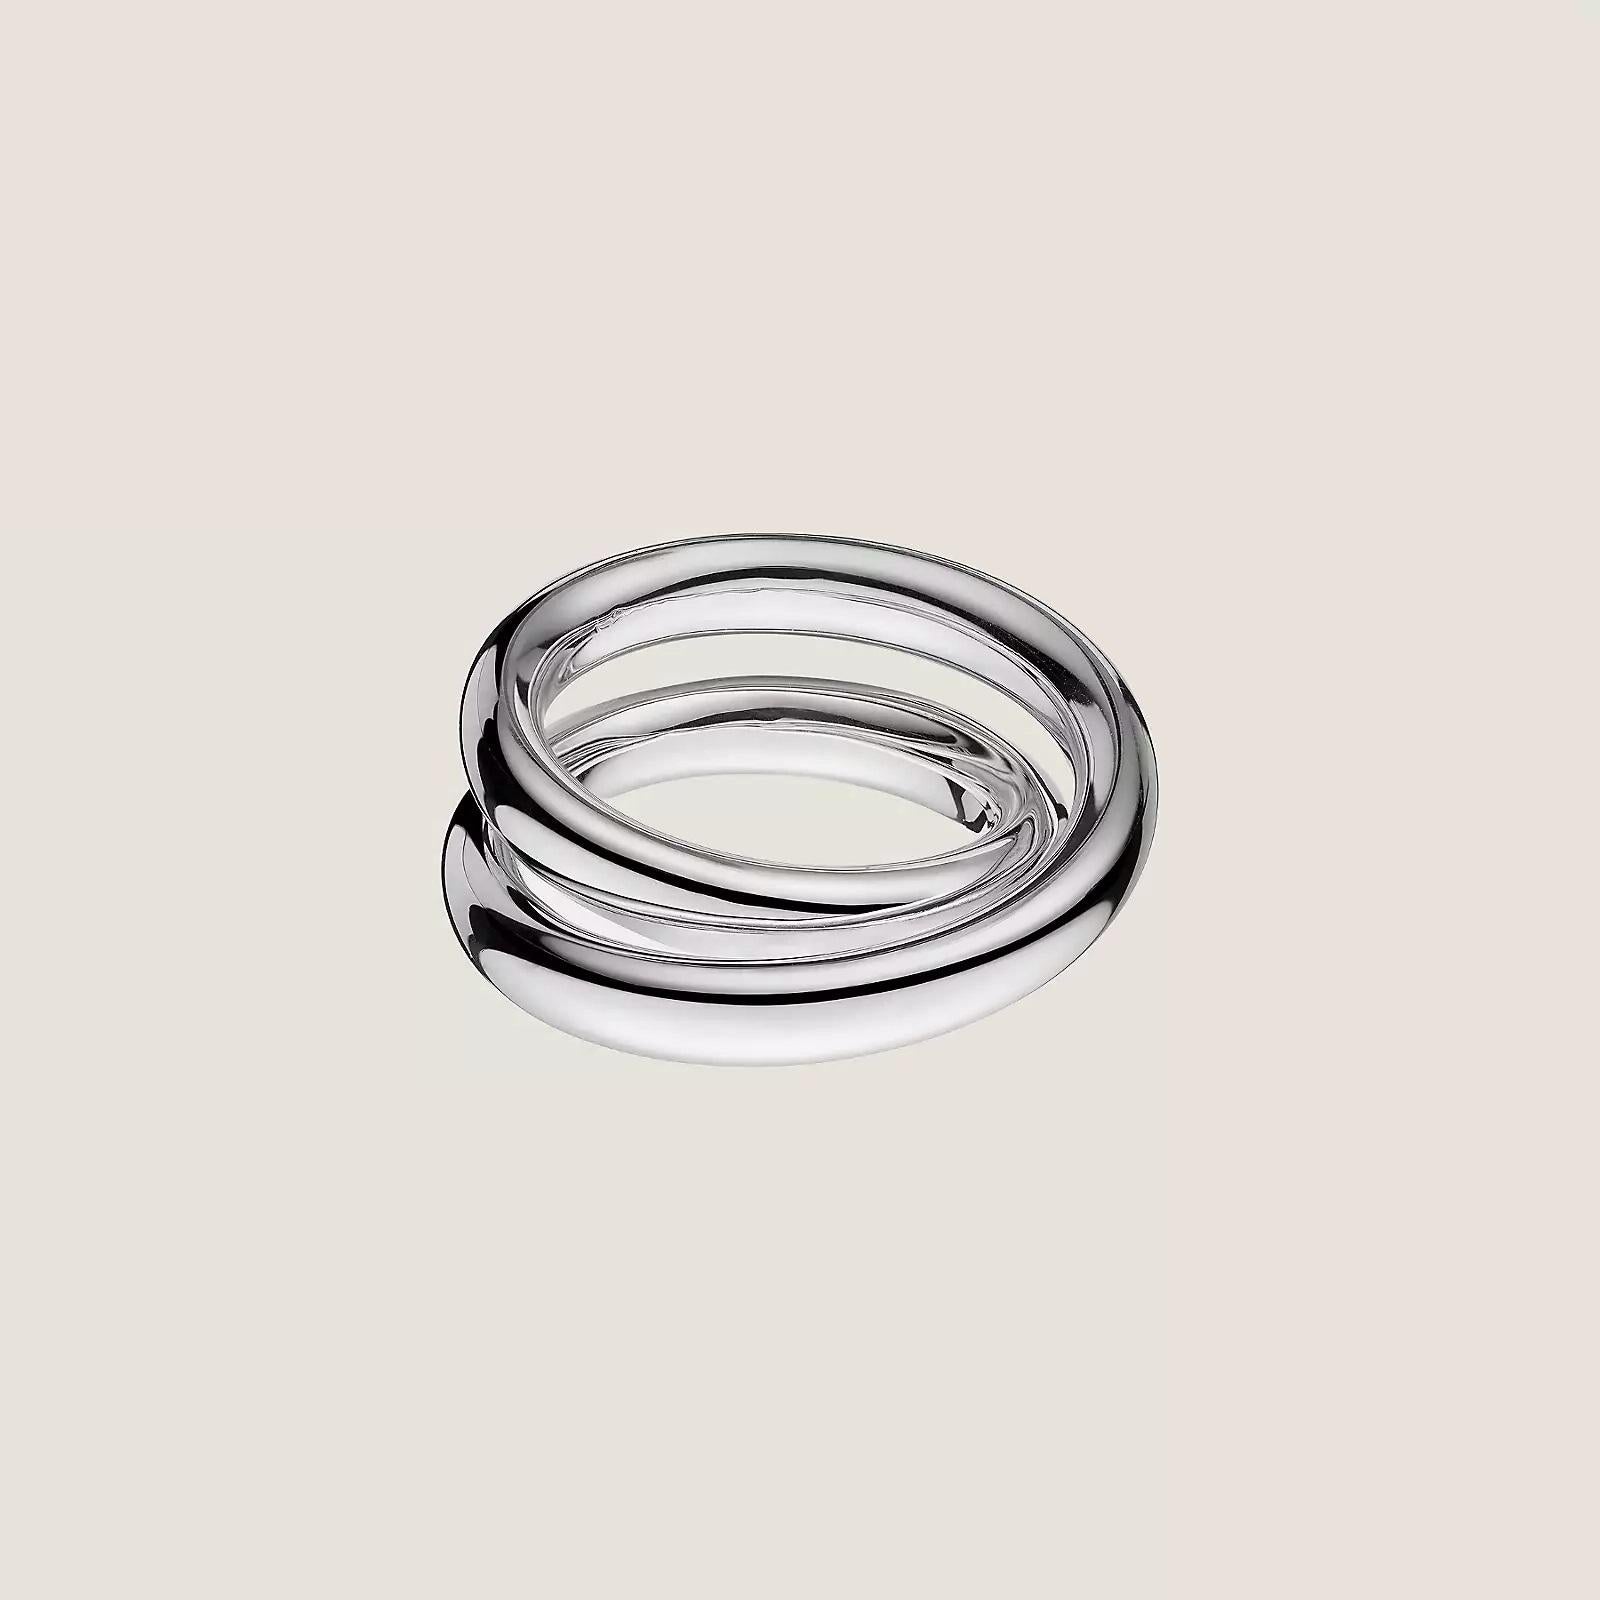 Size 46mm us 3 3/4
Ring in sterling silver

Vertige is inspired by Double Tour, a signature Hermès piece created by Martin Margiela in 1998.

Made in Italy

Silver 925/1000

Width: 0.45 cm